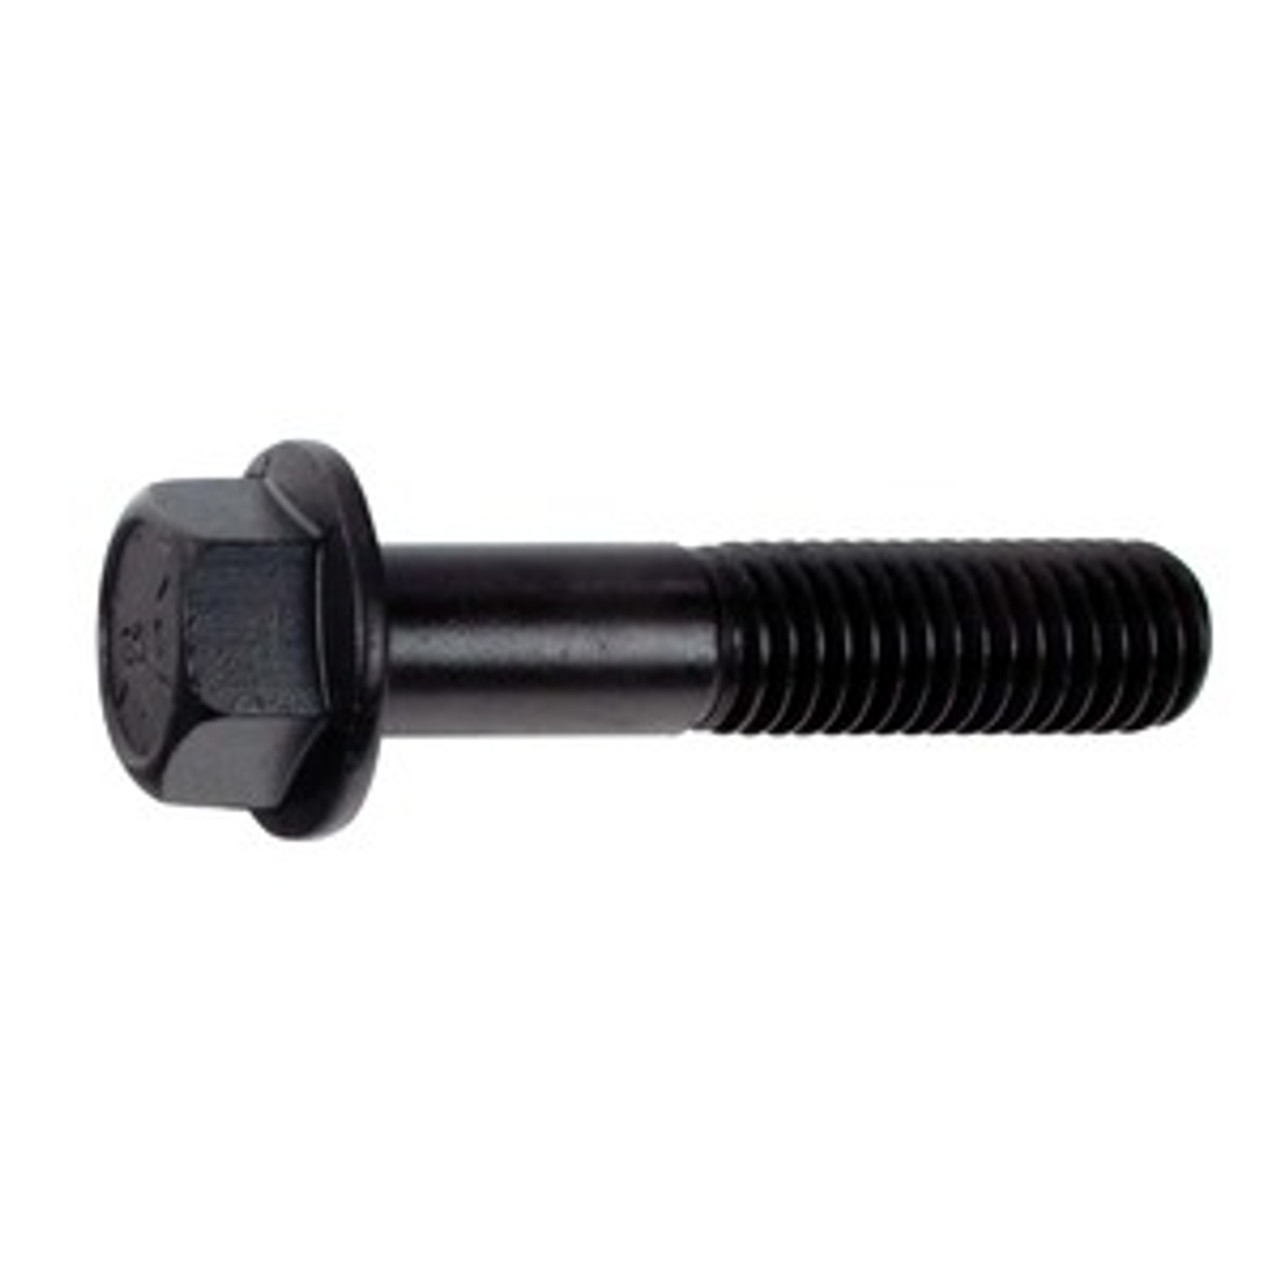 Hex Flange Frame Bolts
Grade 8
1/2"-13 x 3-1/2"
U.S.S. Coarse Thread
Phosphate
15 Per Box
Click Next Image For Bolt Size Chart